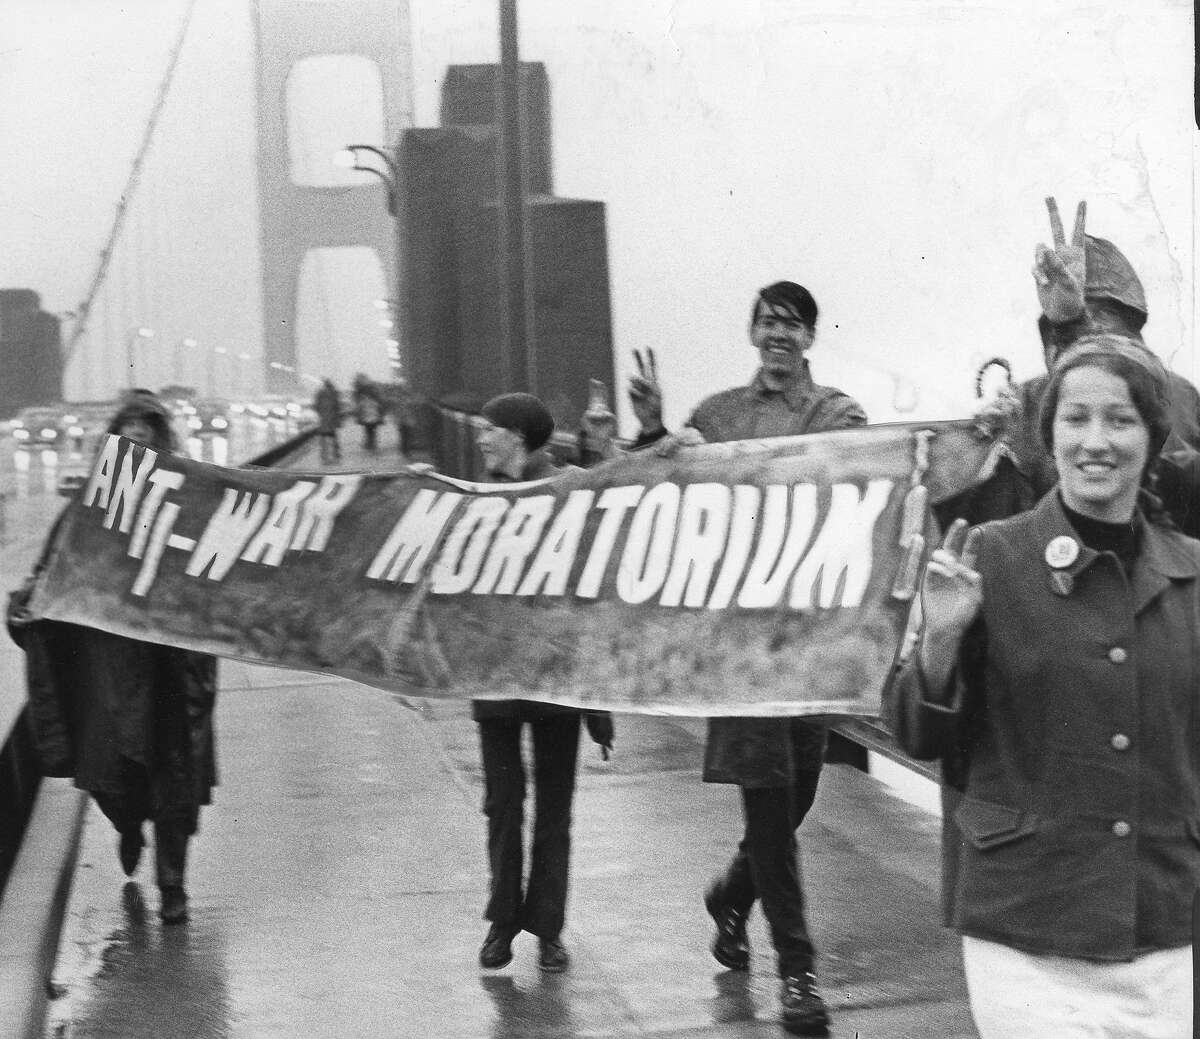 Anti war protestors carry signs as they march across the Golden Gate Bridge on Moratorium Day, October 15, 1969 Photo ran 10/16/1969, p. 6